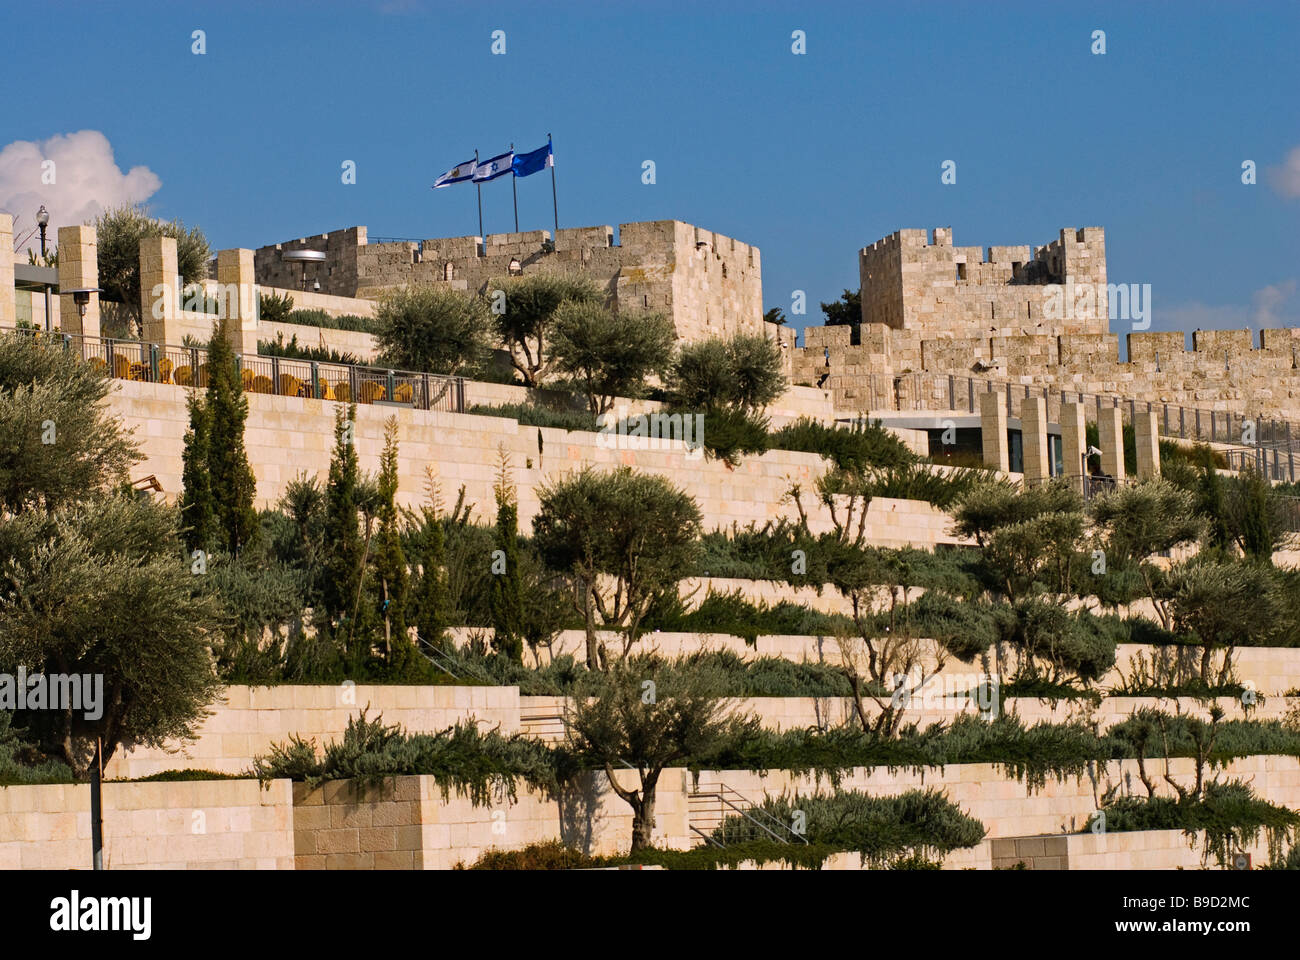 View of the terraced garden of Mamilla neighborhood in front of the western walls of the Old City of Jerusalem Israel Stock Photo